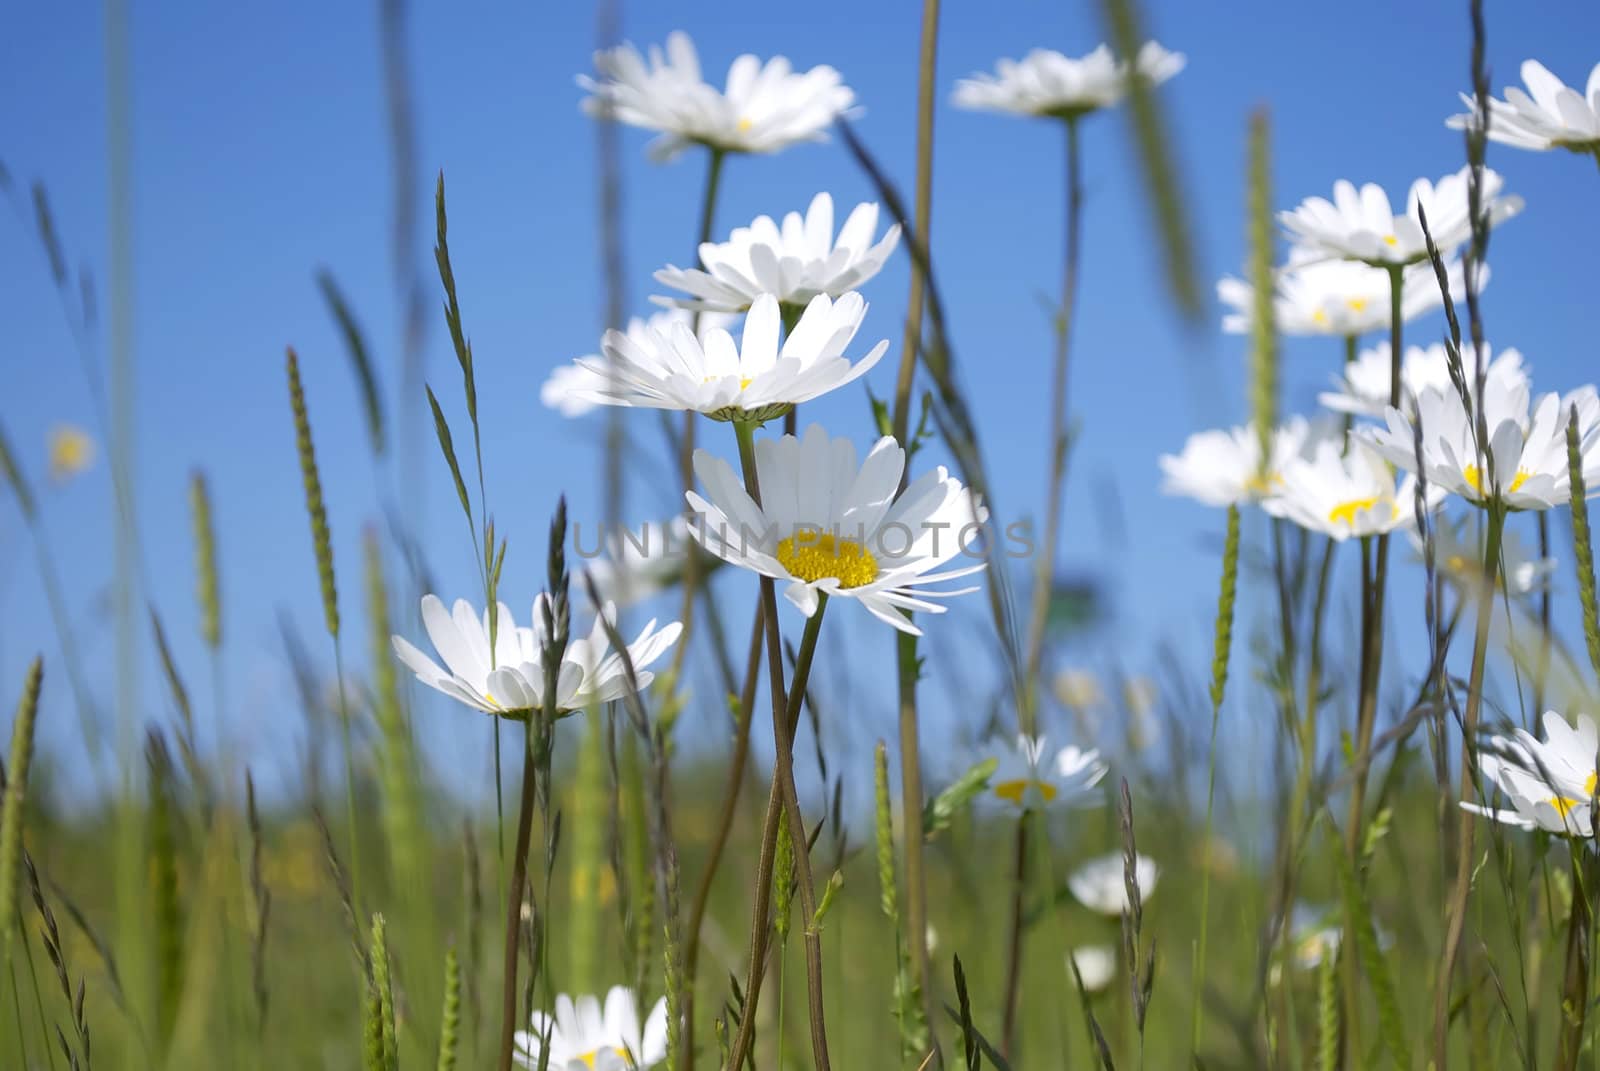 Royalty free stock image of a collection of spring daisies against a clear blue sky